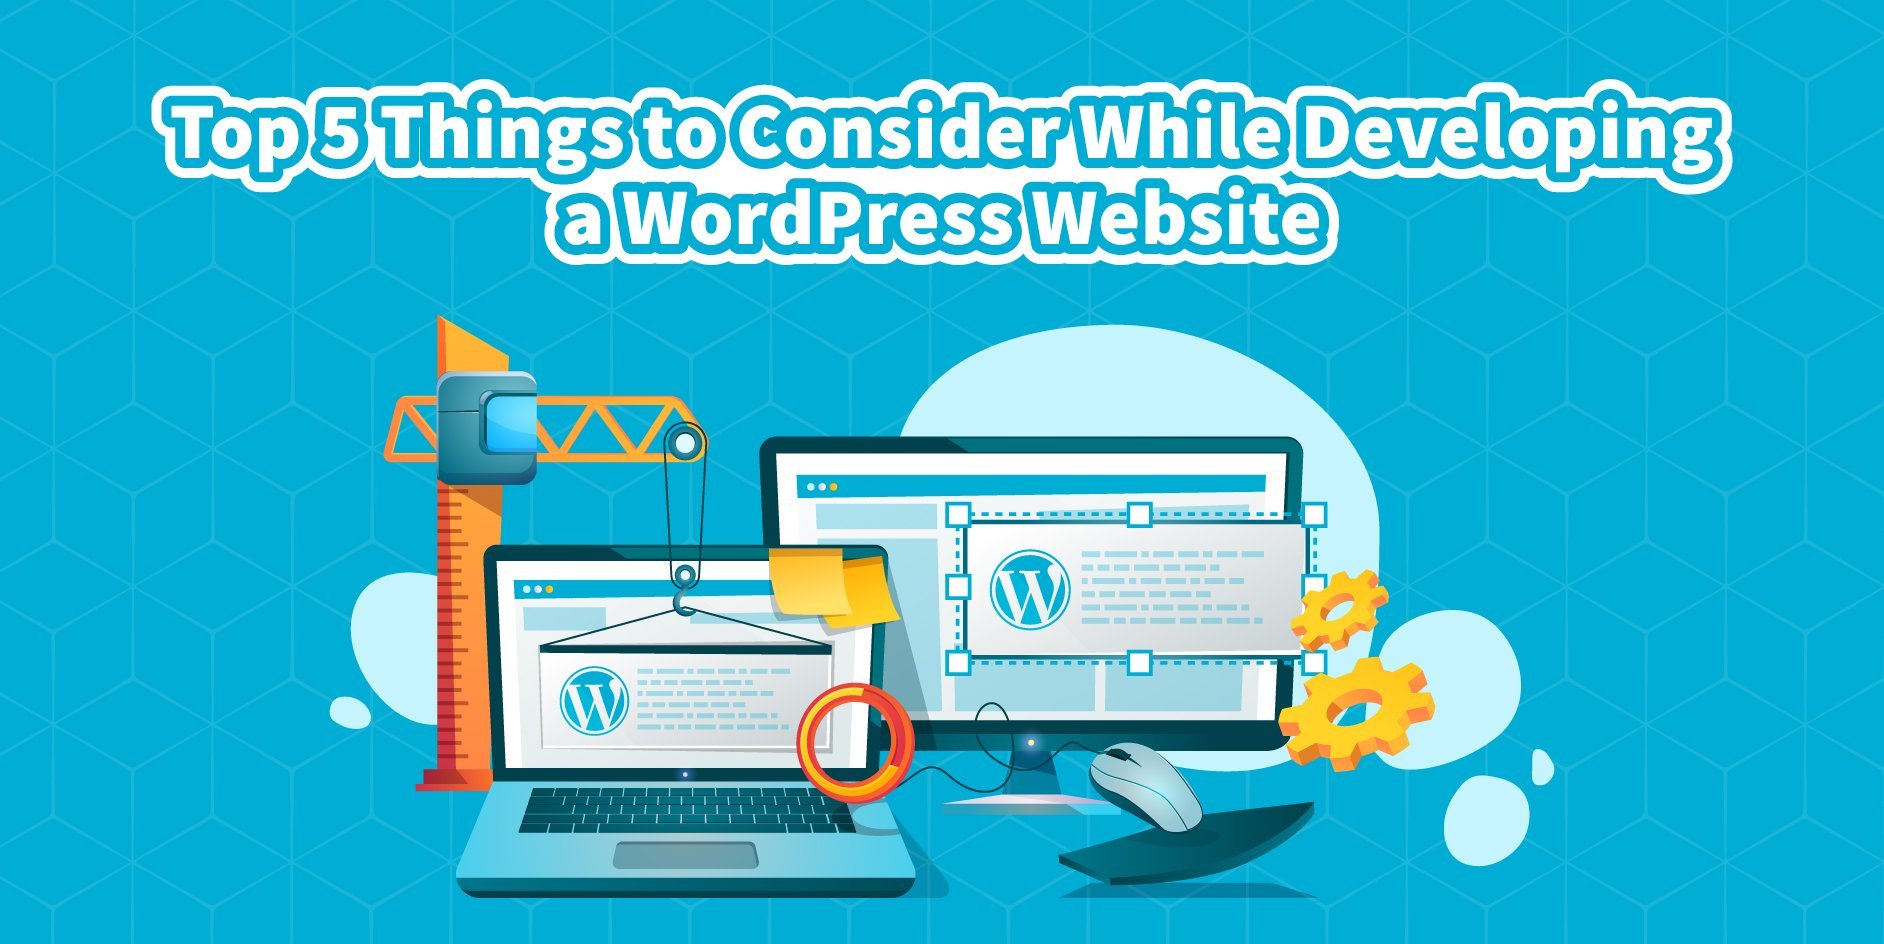 Top-5-things-to-consider-while-developing-a-WordPress-Website